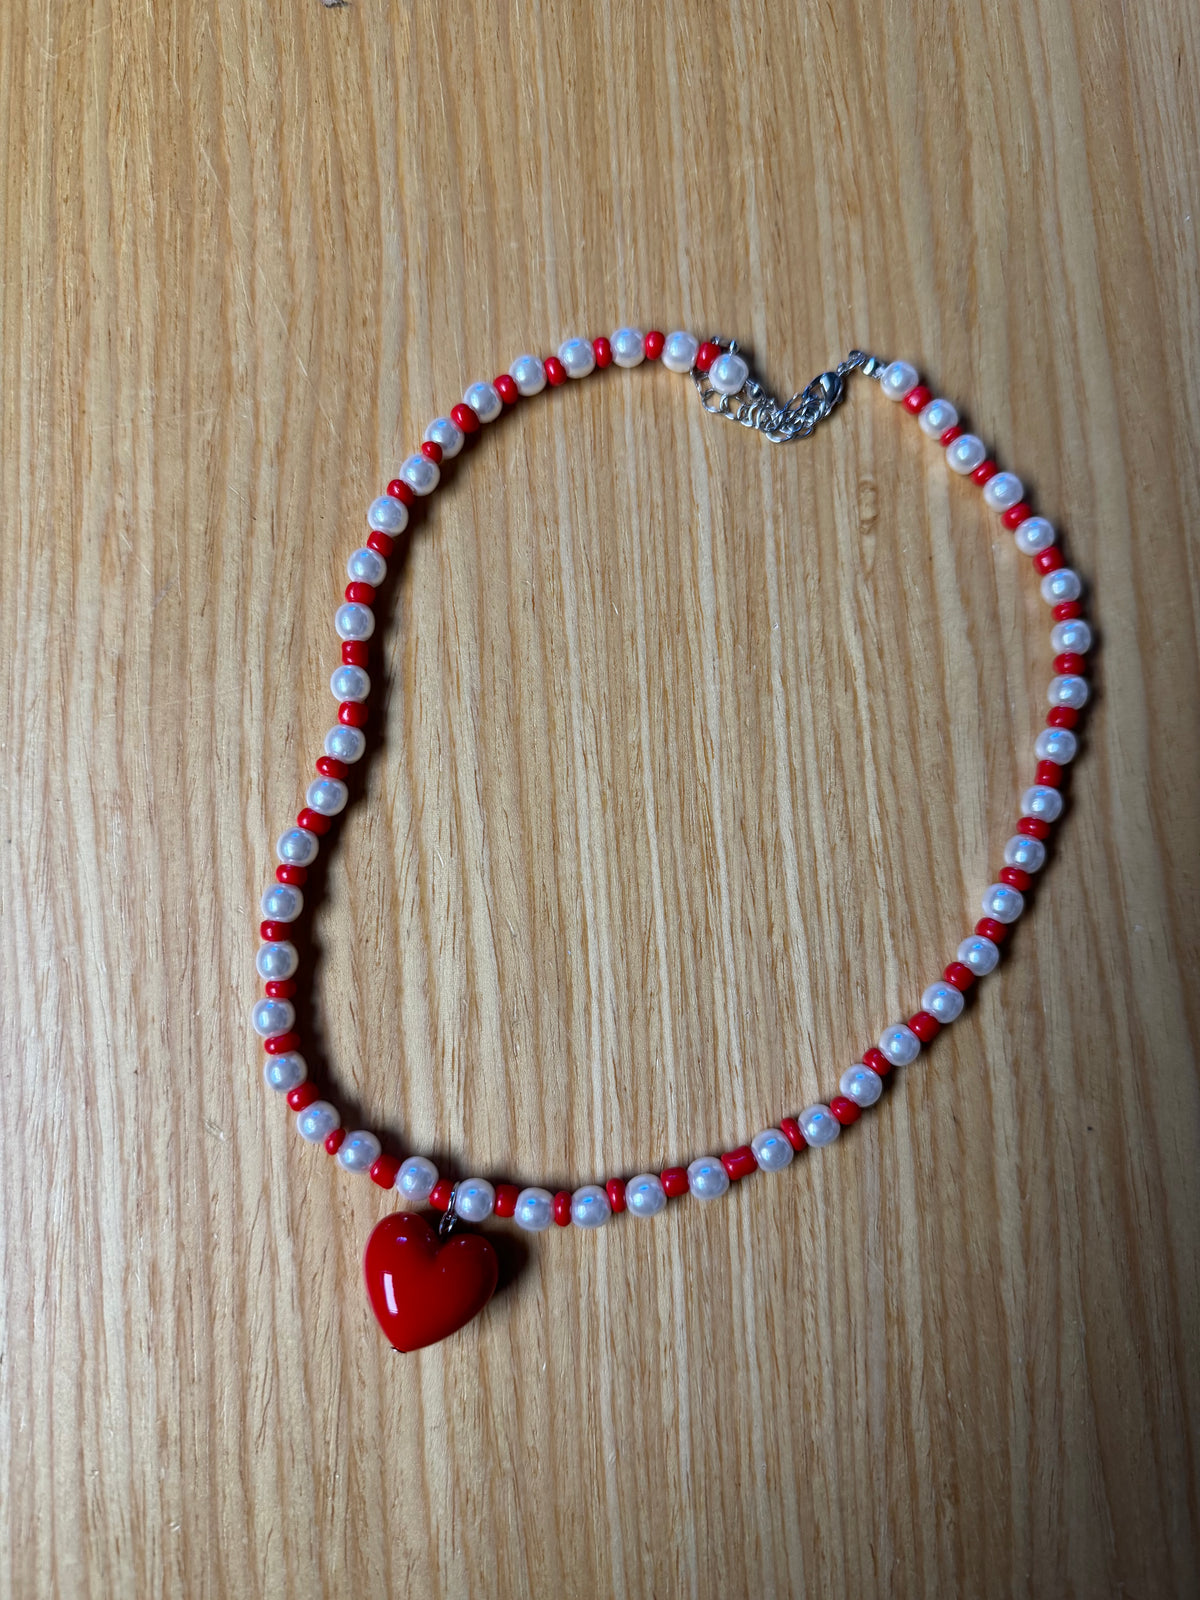 Beaded Red & White Heart Necklace